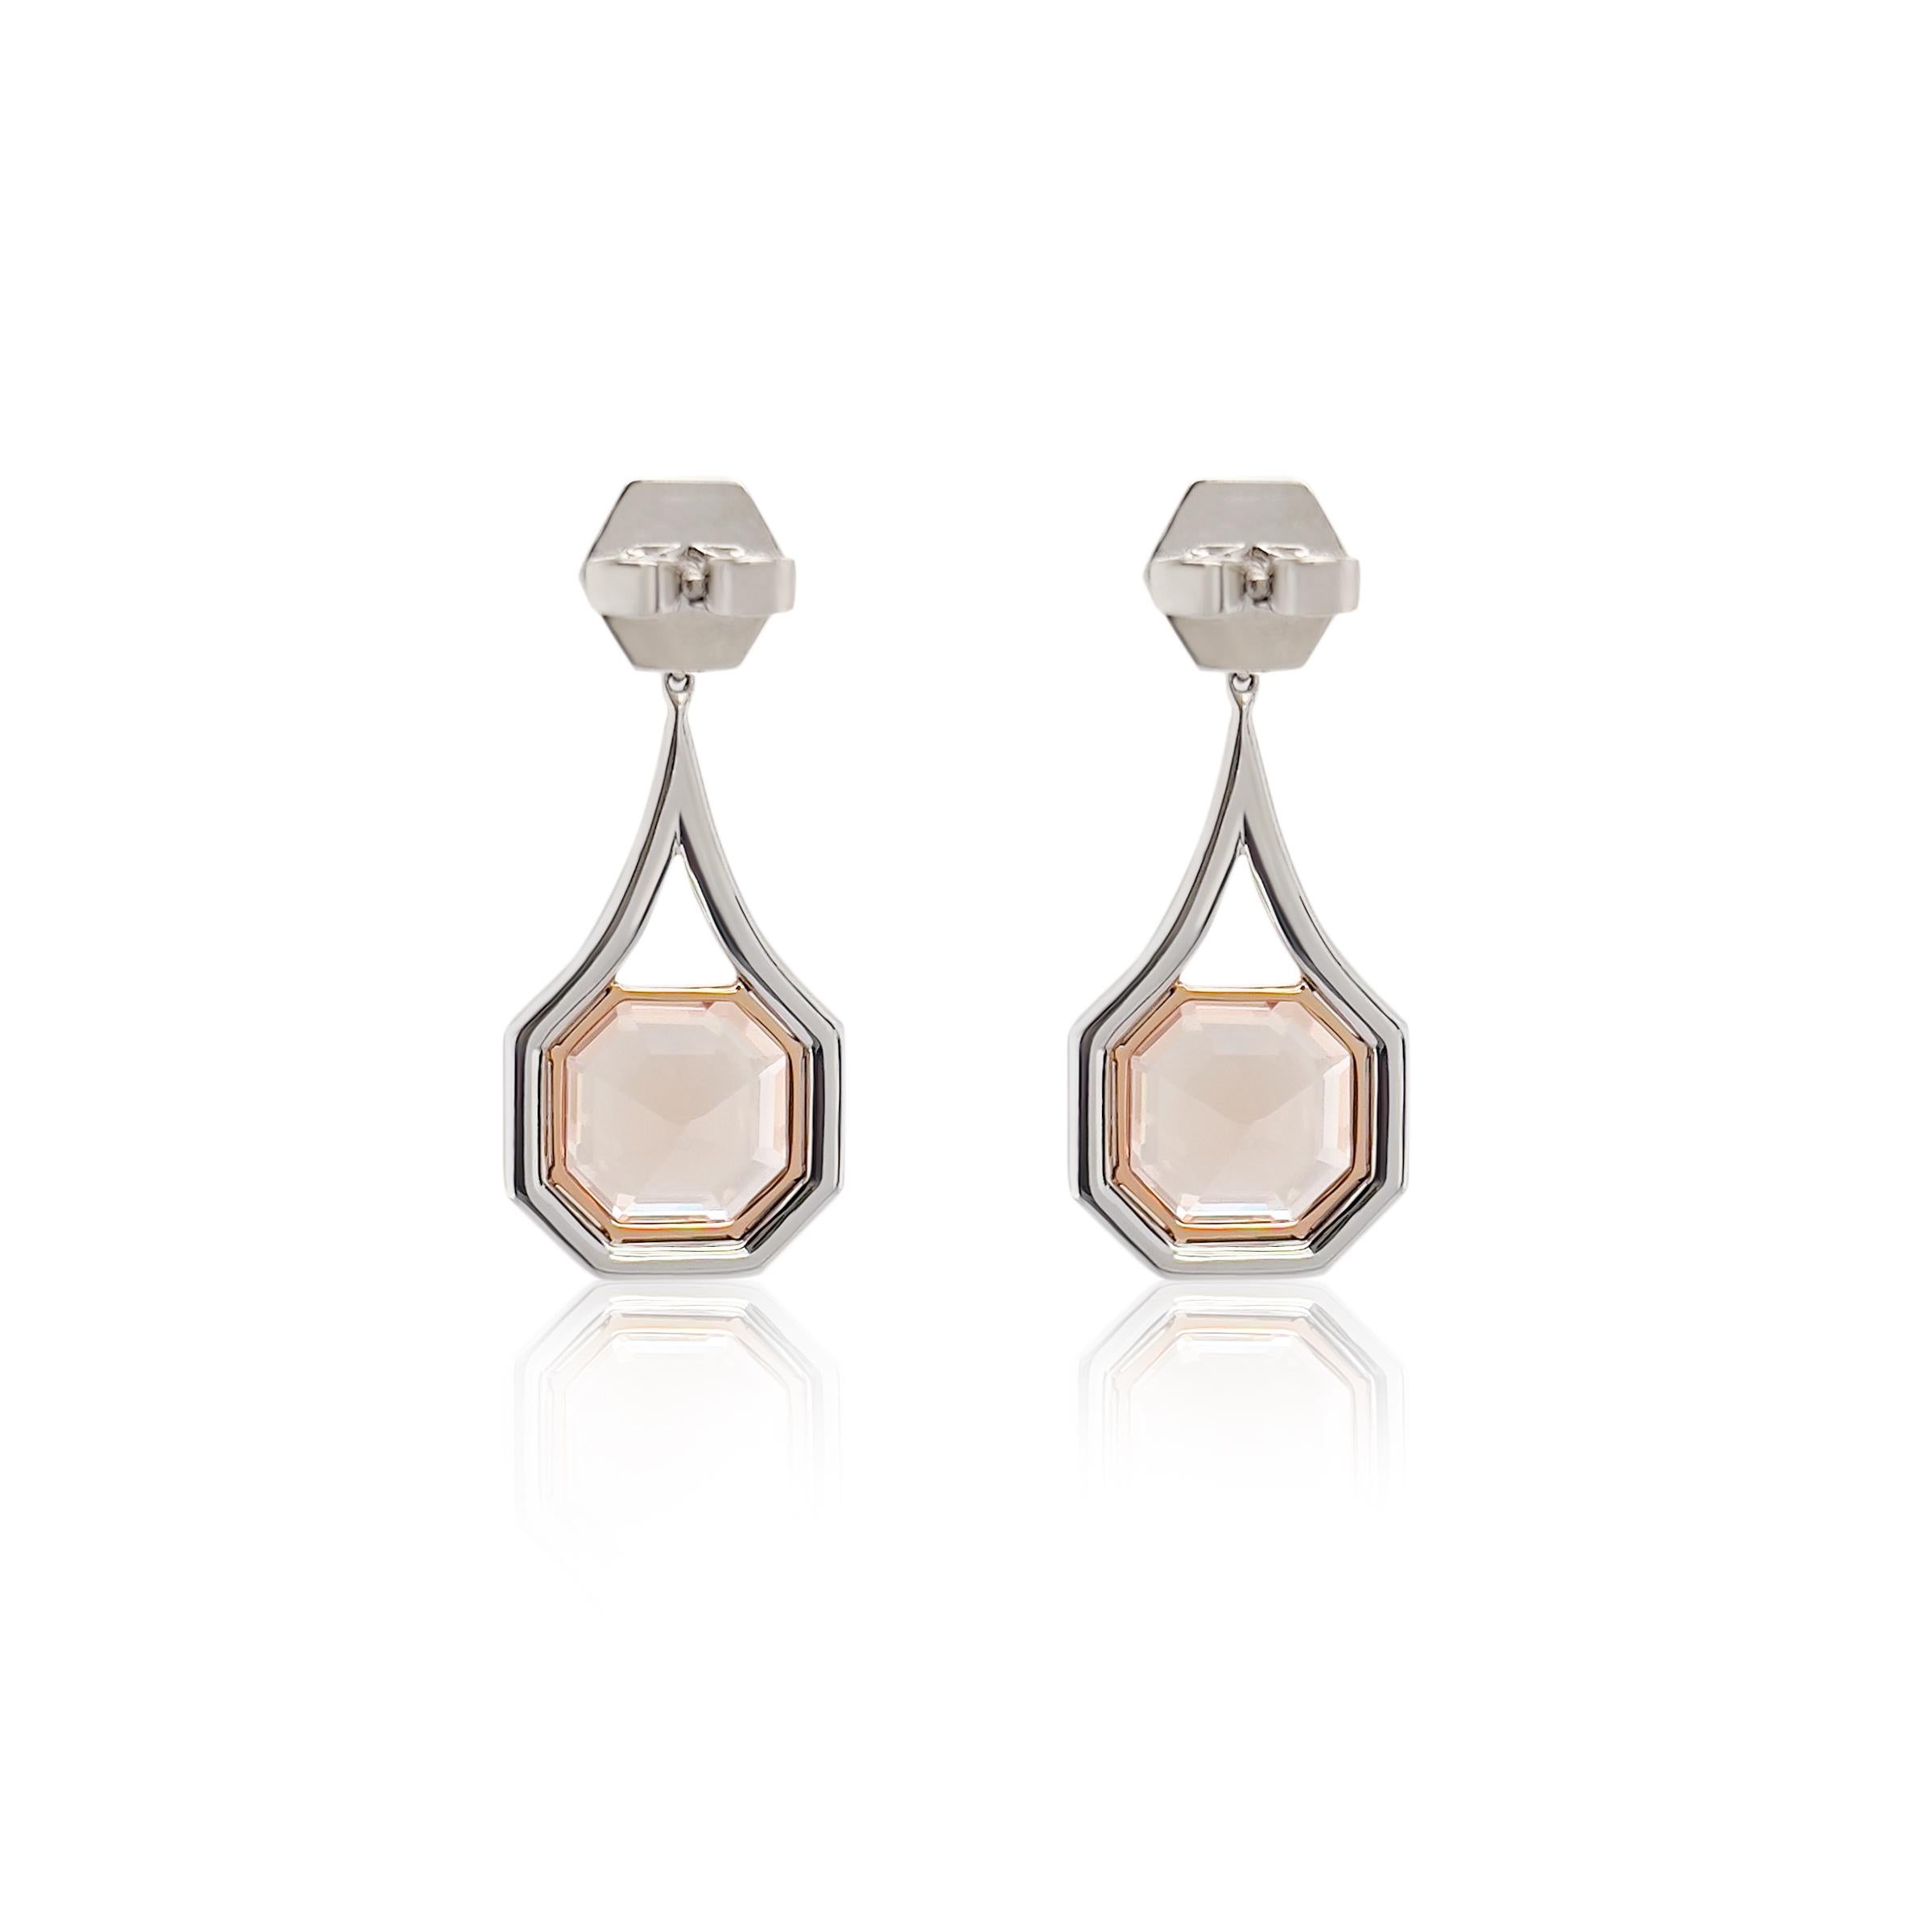 These Morganite and Diamond Dangle Earrings are a stunning edition to any jewelry collection. The earrings feature a pair of rare ascher cut morganites. The morganites are surrounded by round brilliant cut pave'd diamonds integrated into this